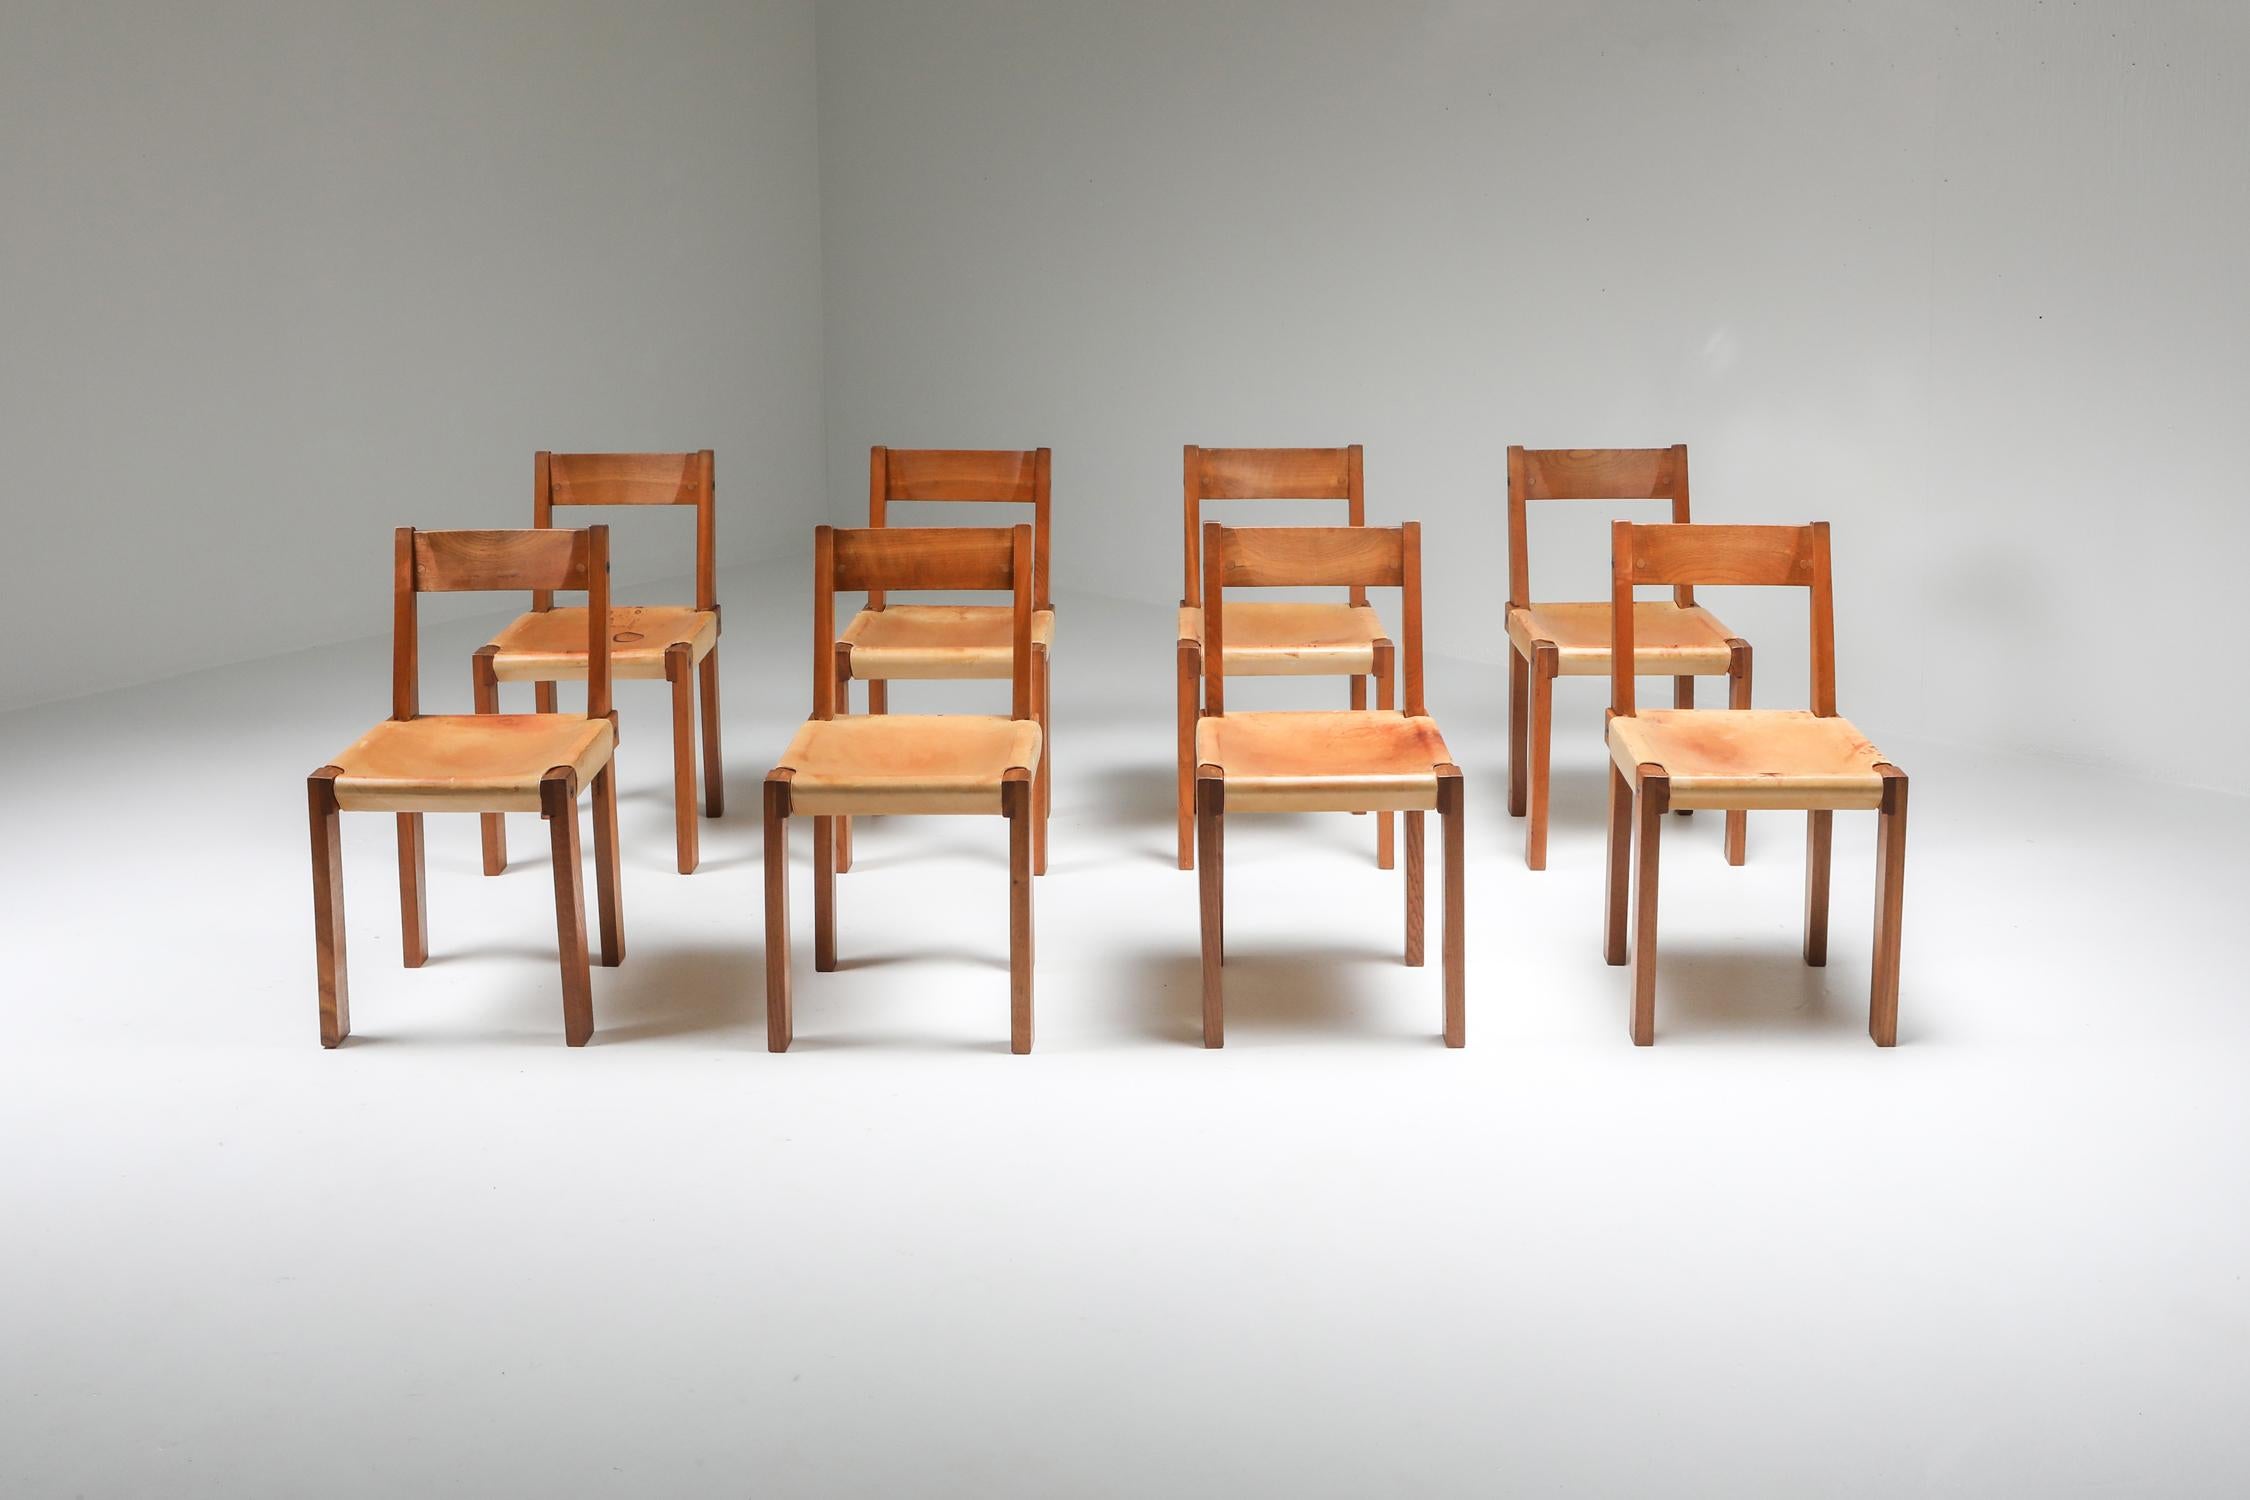 Pierre Chapo, set of 8 dining chairs, model S24, elm and natural leather, France, circa 1966

A set of 8 chairs in solid elmwood with saddle leather seating and back. Designed by French designer Pierre Chapo in Paris. These chairs have a cubic